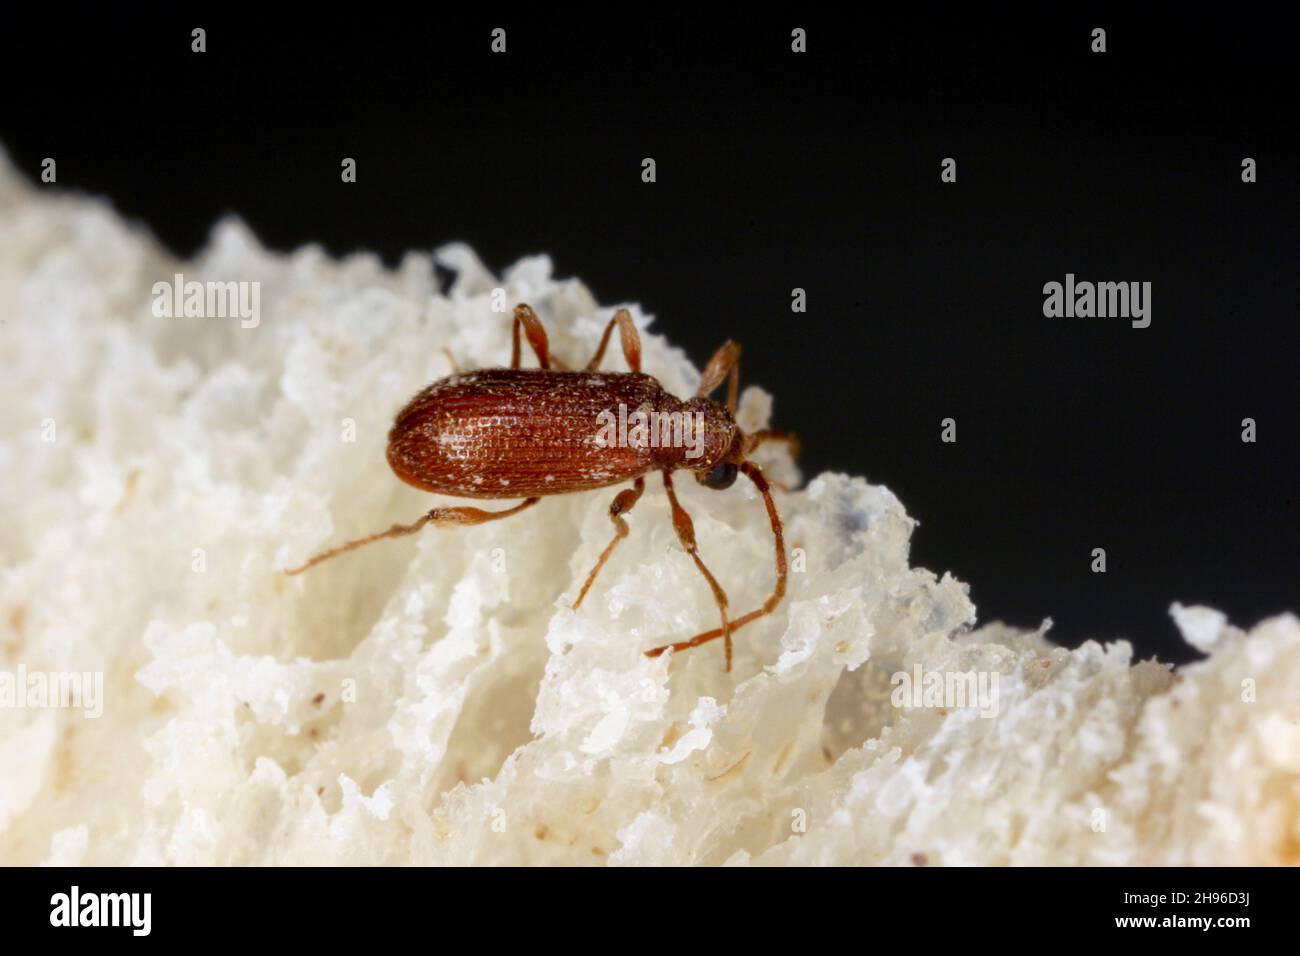 Ptinus fur beetles in the subfamily Ptininae - hitemarked spider beetle, family Anobiidae - woodworm or wood borer. Pest of food in homes, shops. Stock Photo